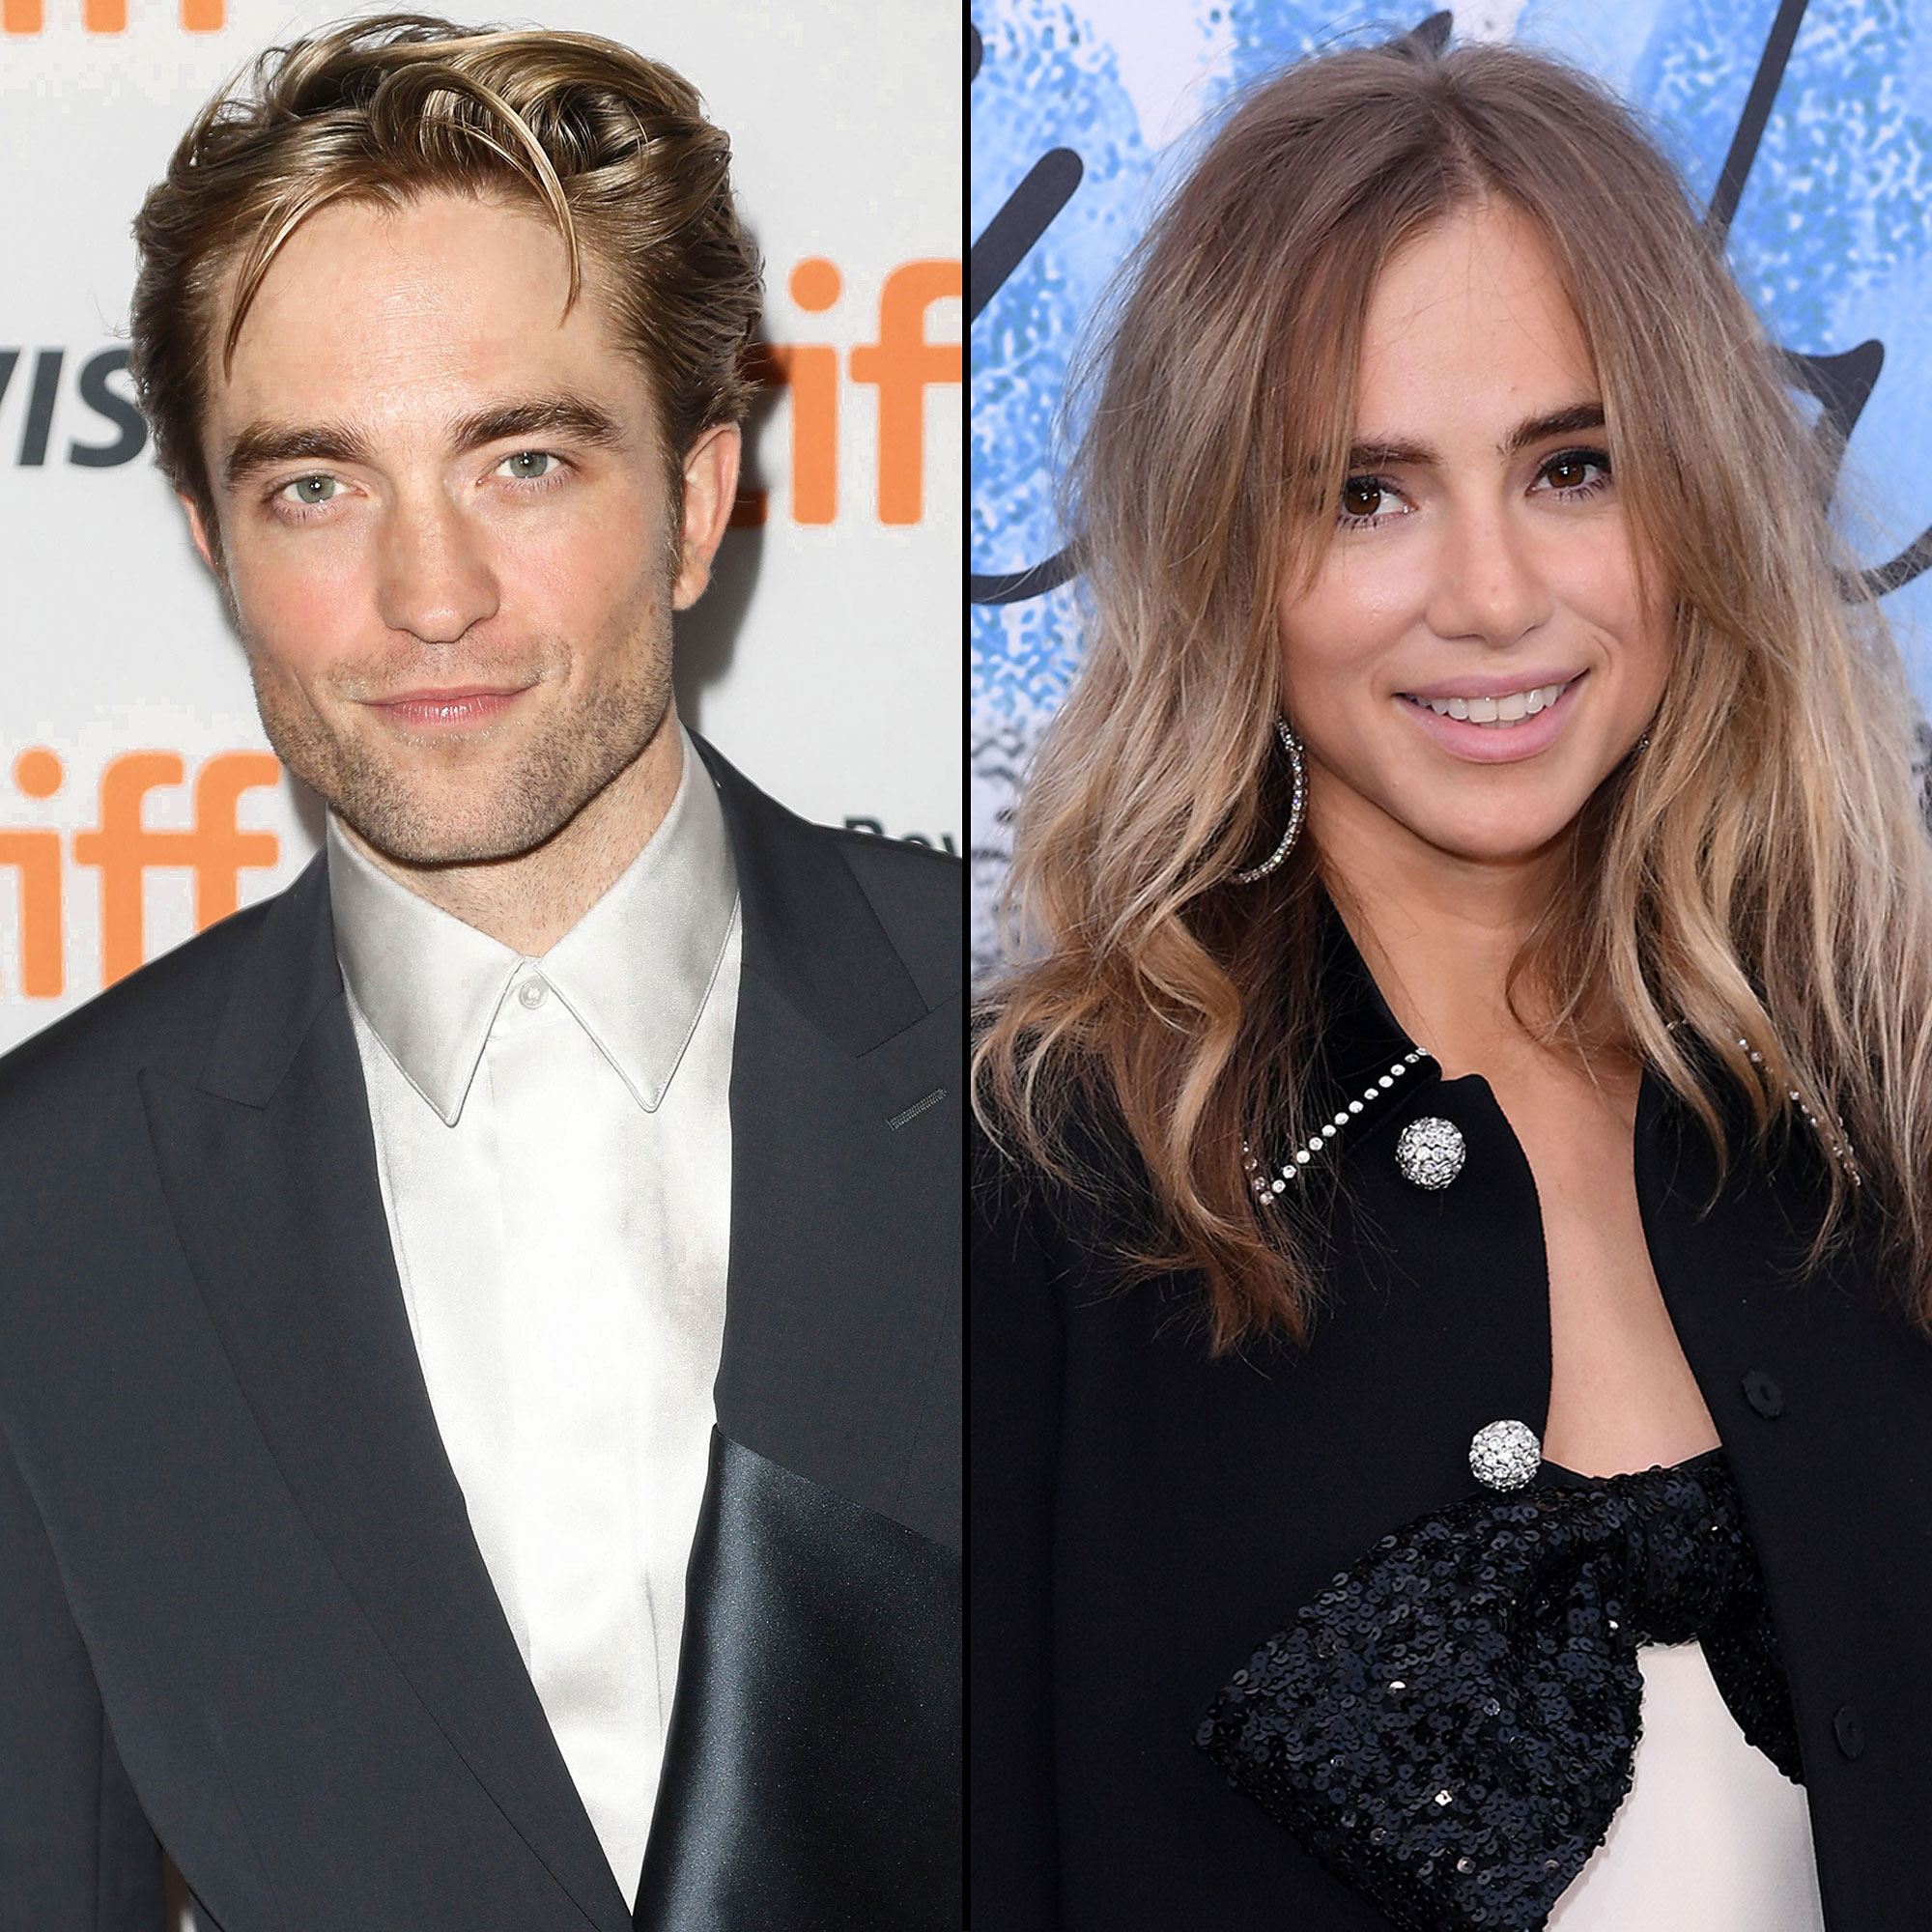 Rob who 2018 dating is pattinson who is